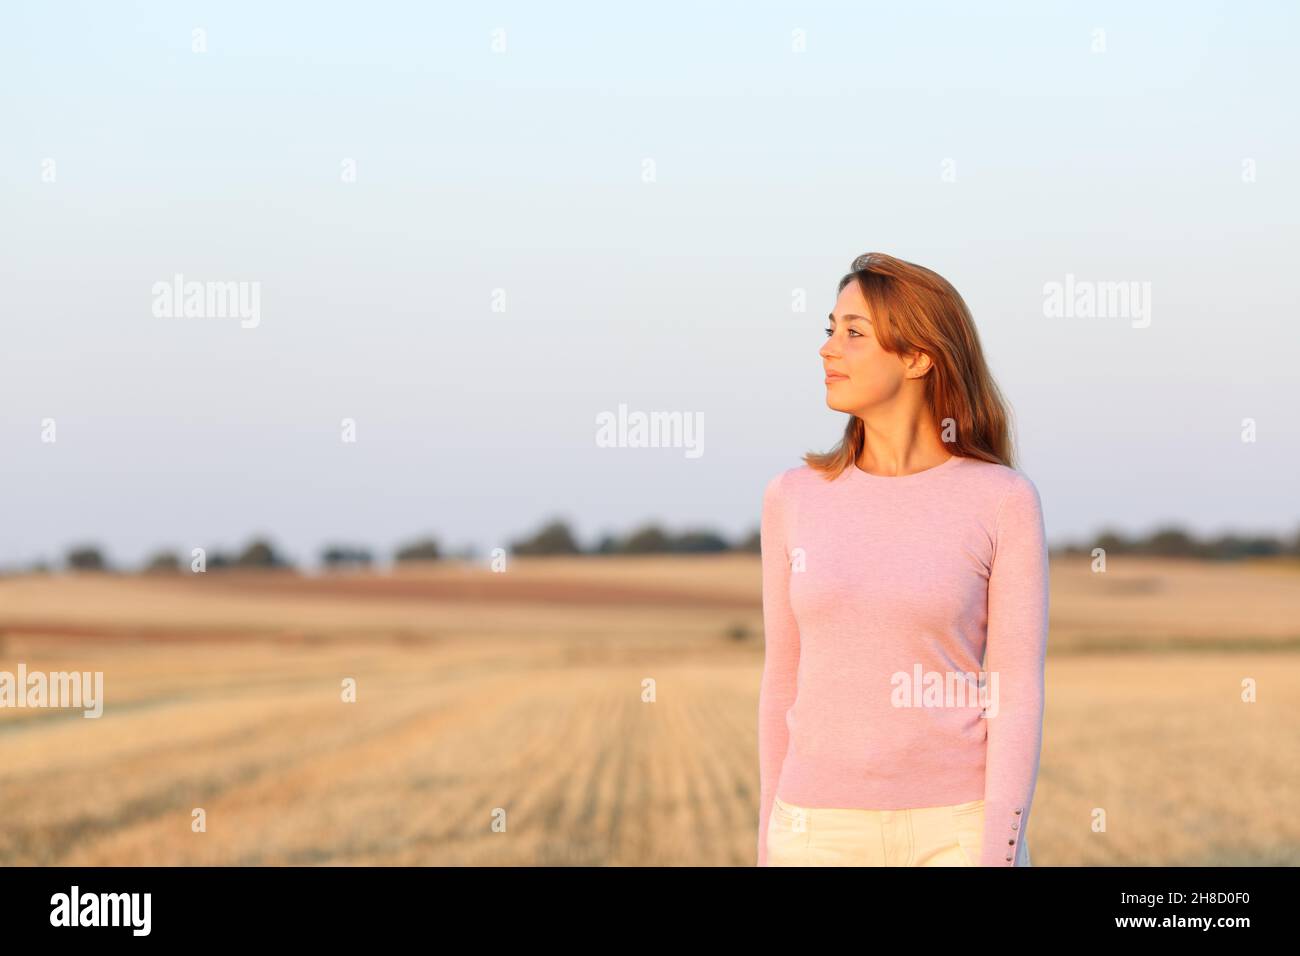 Woman contemplating views in a harvested field at sunset Stock Photo